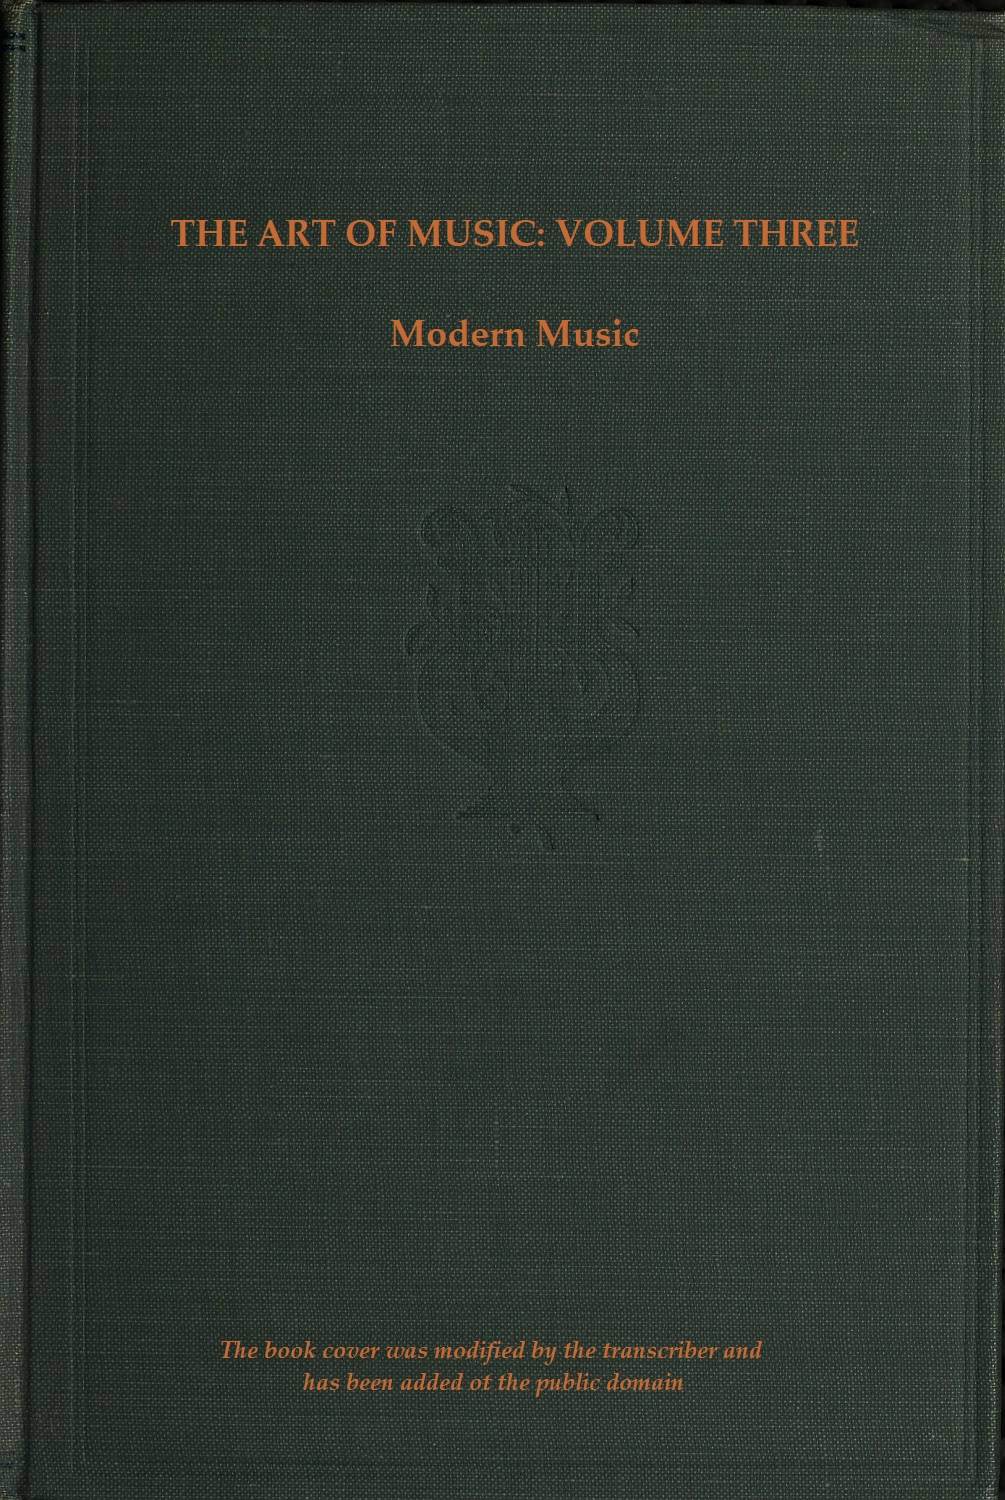 The Art of Music, by Daniel Gregory Mason—A Project Gutenberg eBook picture